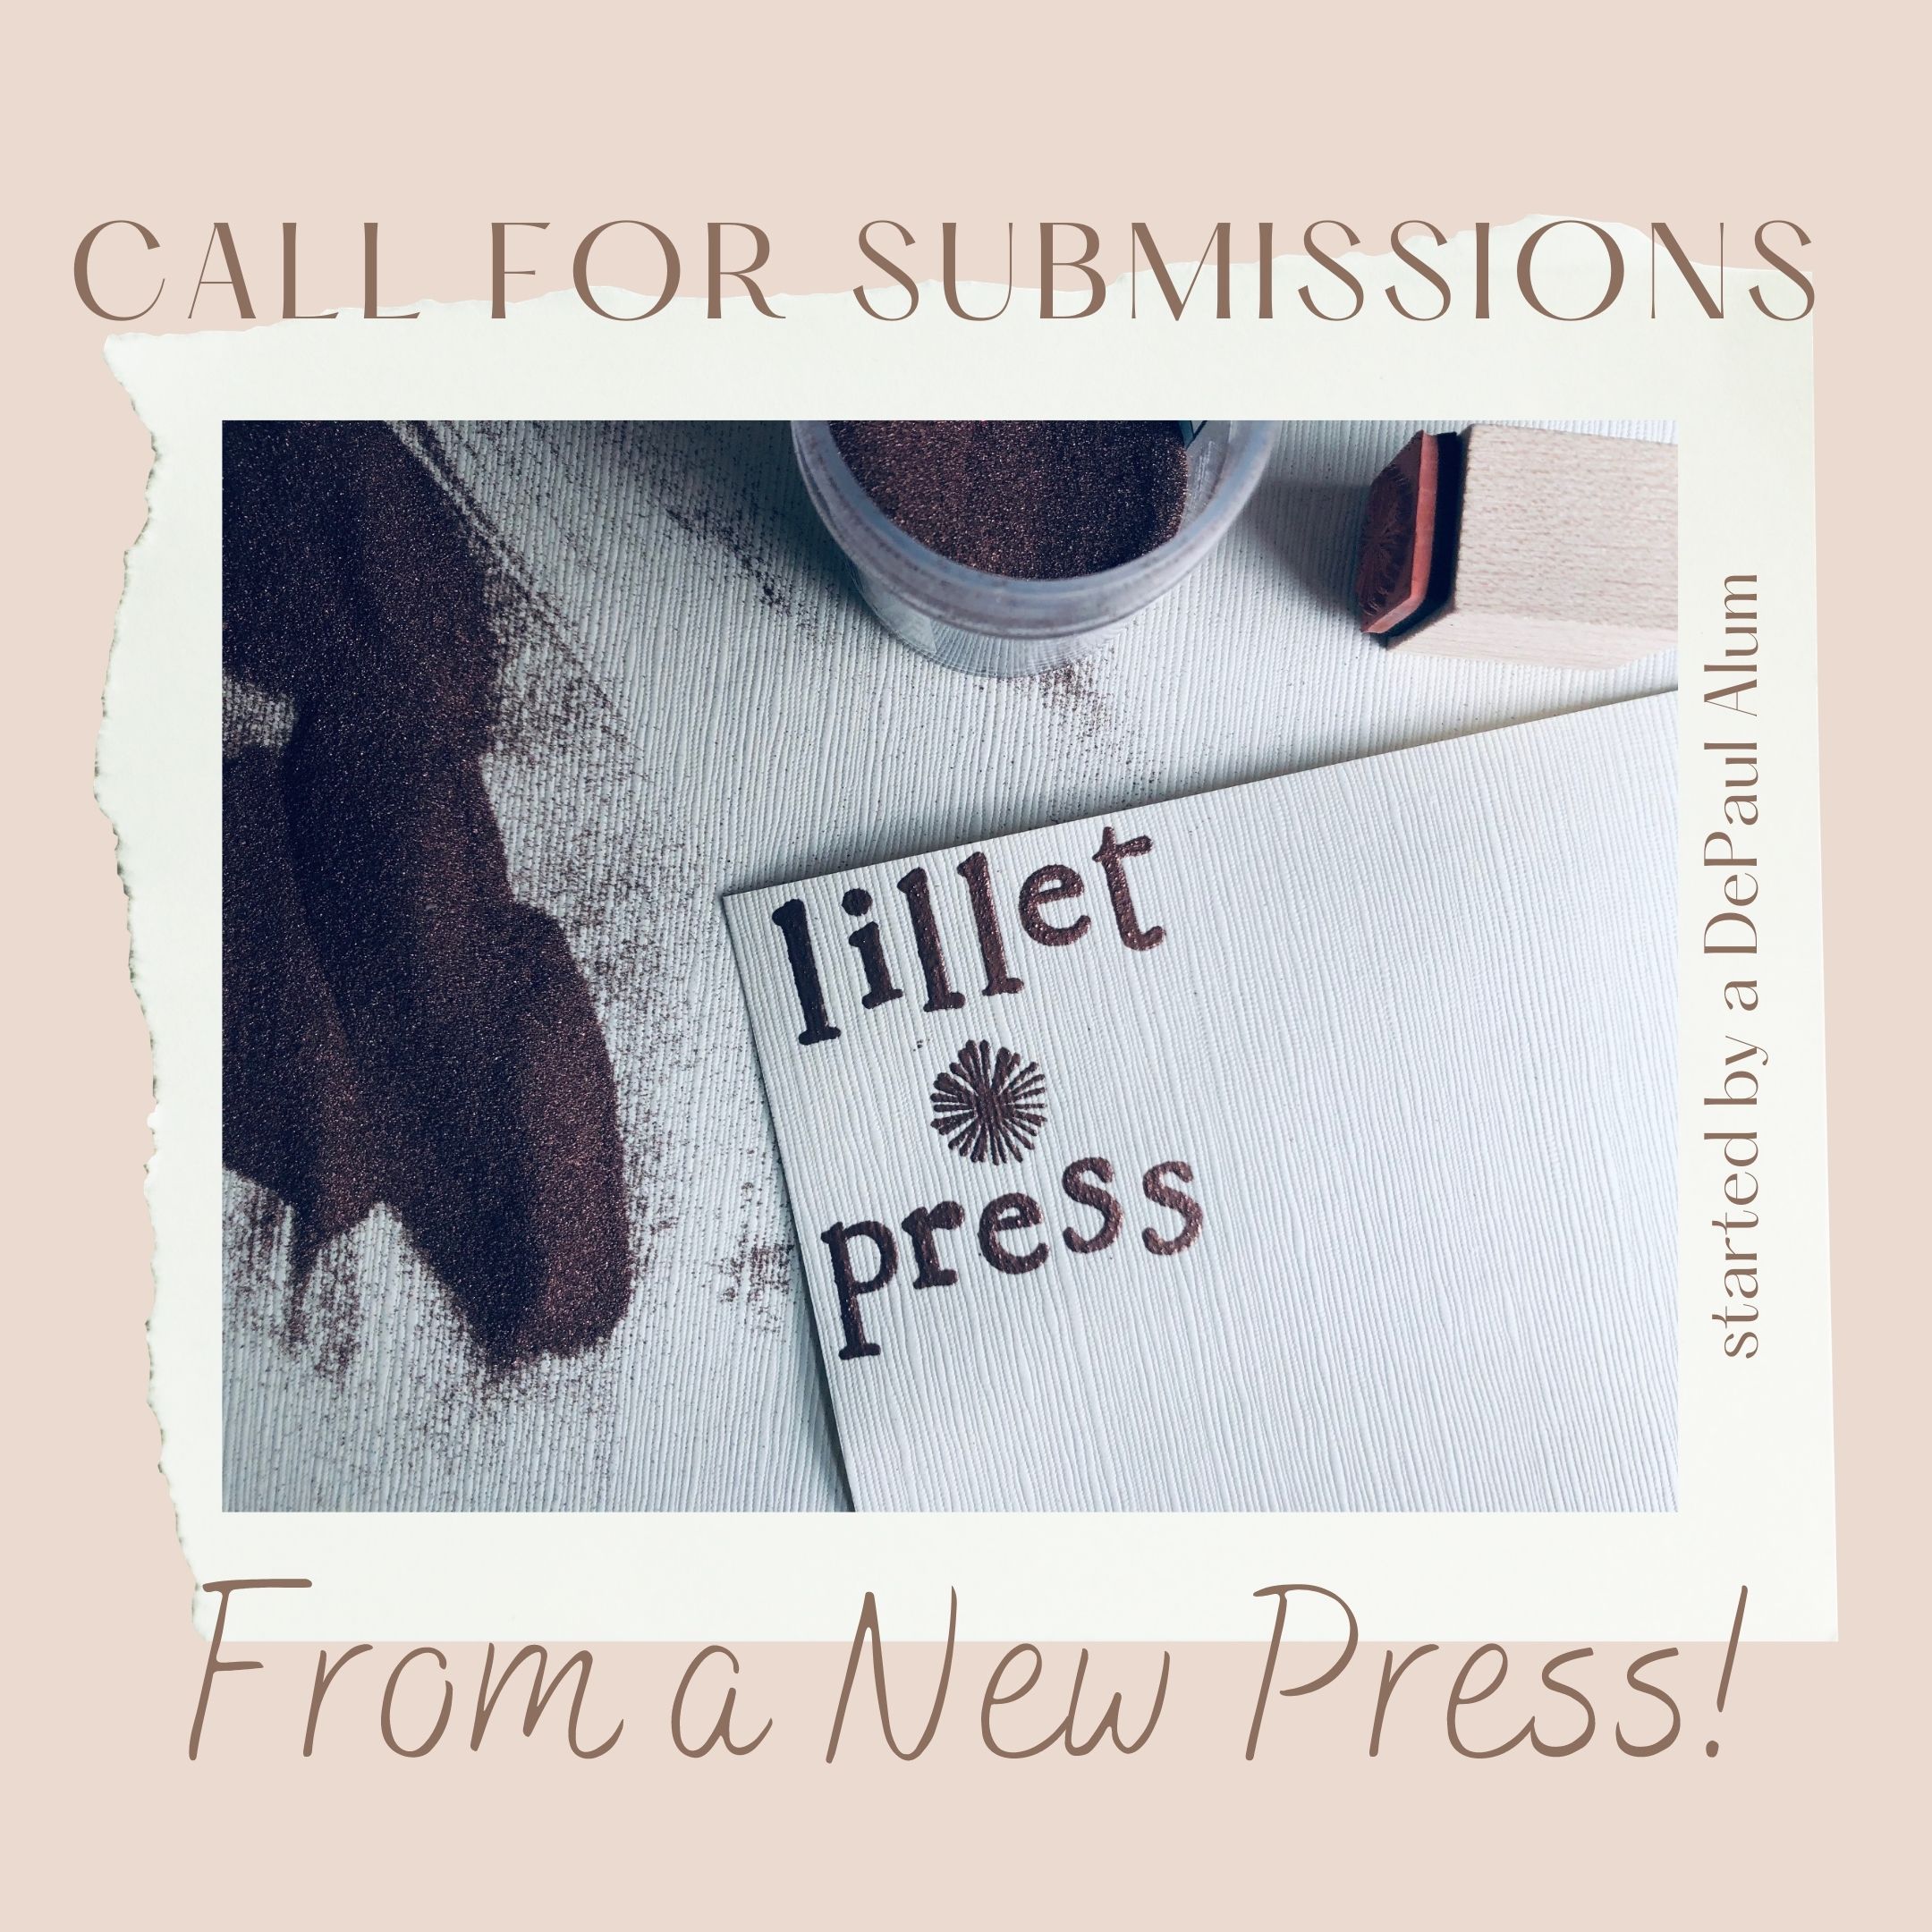 Call for Submissions From a New Press Started by a DePaul Alum